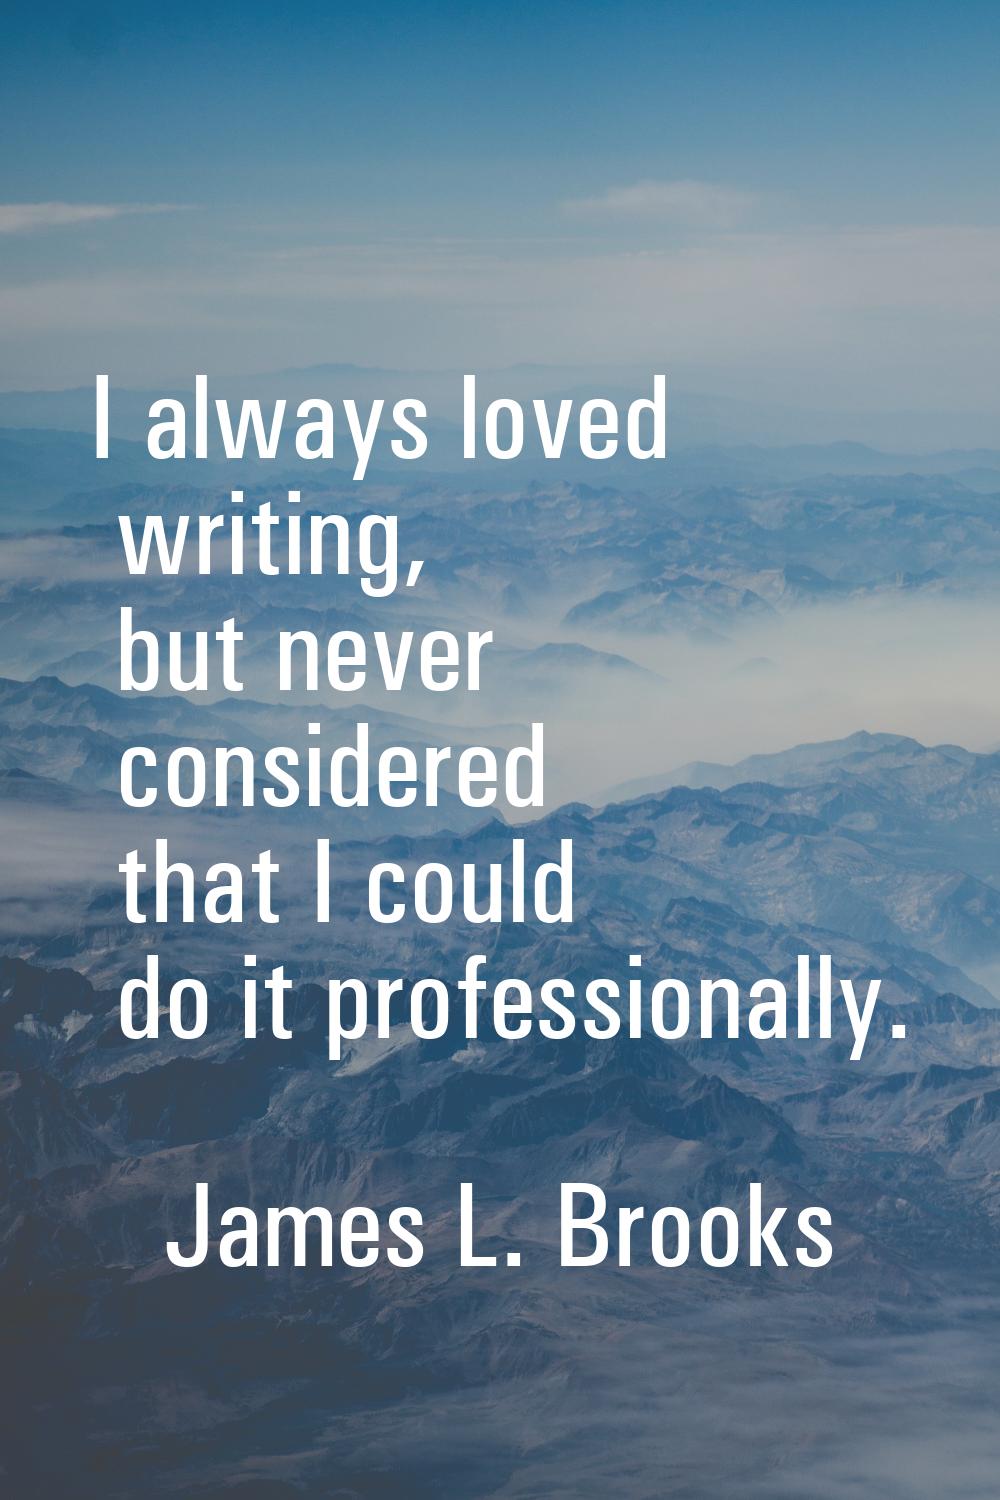 I always loved writing, but never considered that I could do it professionally.